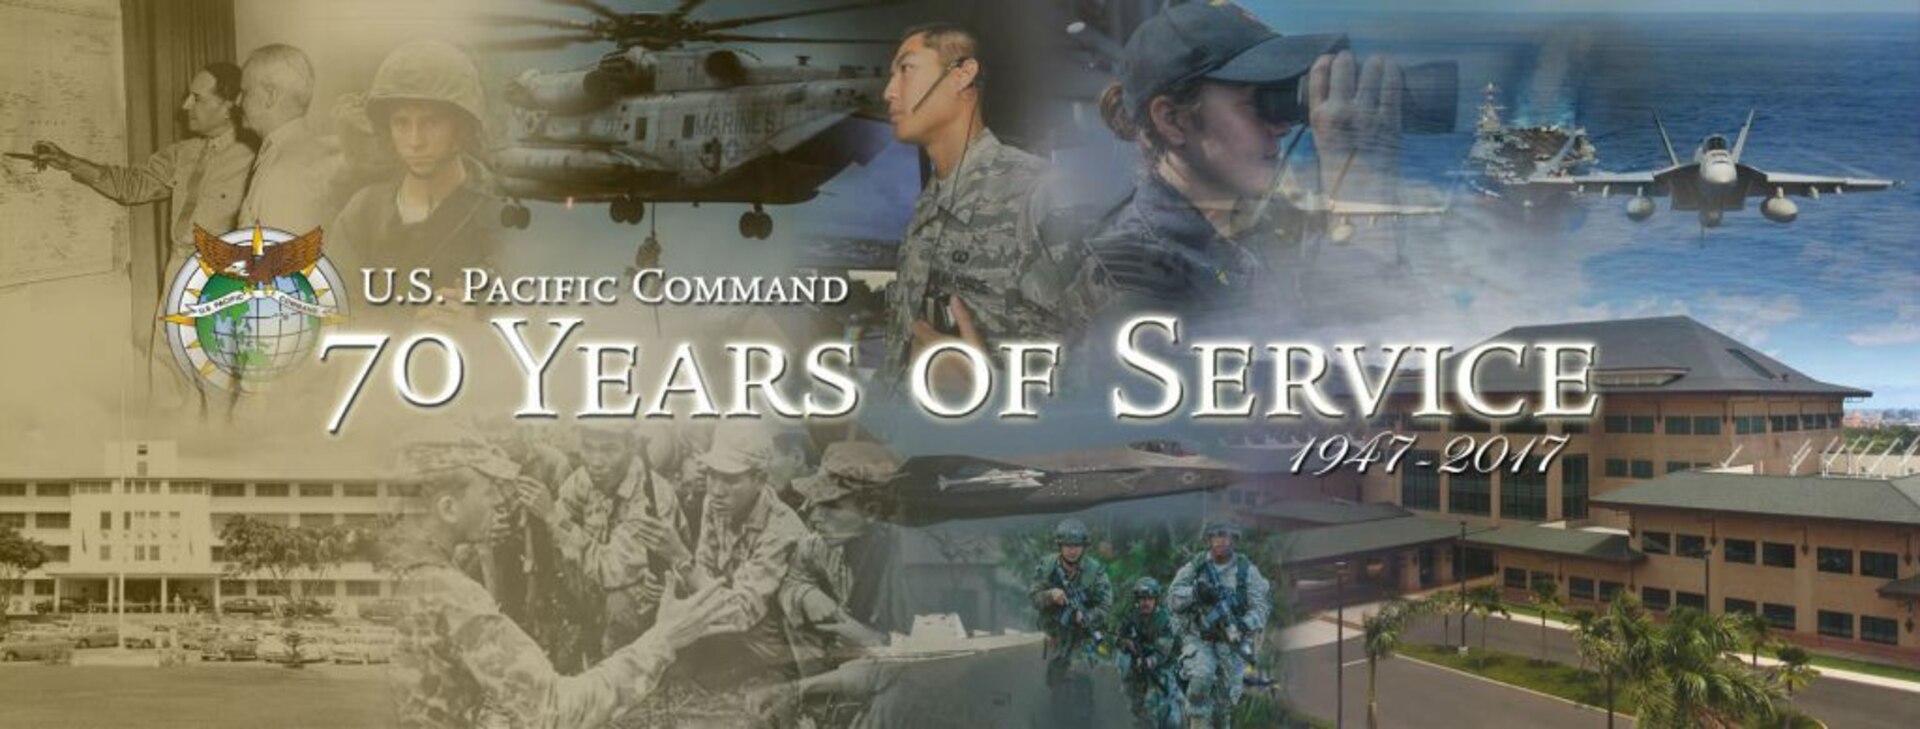 U.S. Pacific Command celebrates 70 years of service on January 1, 2017.